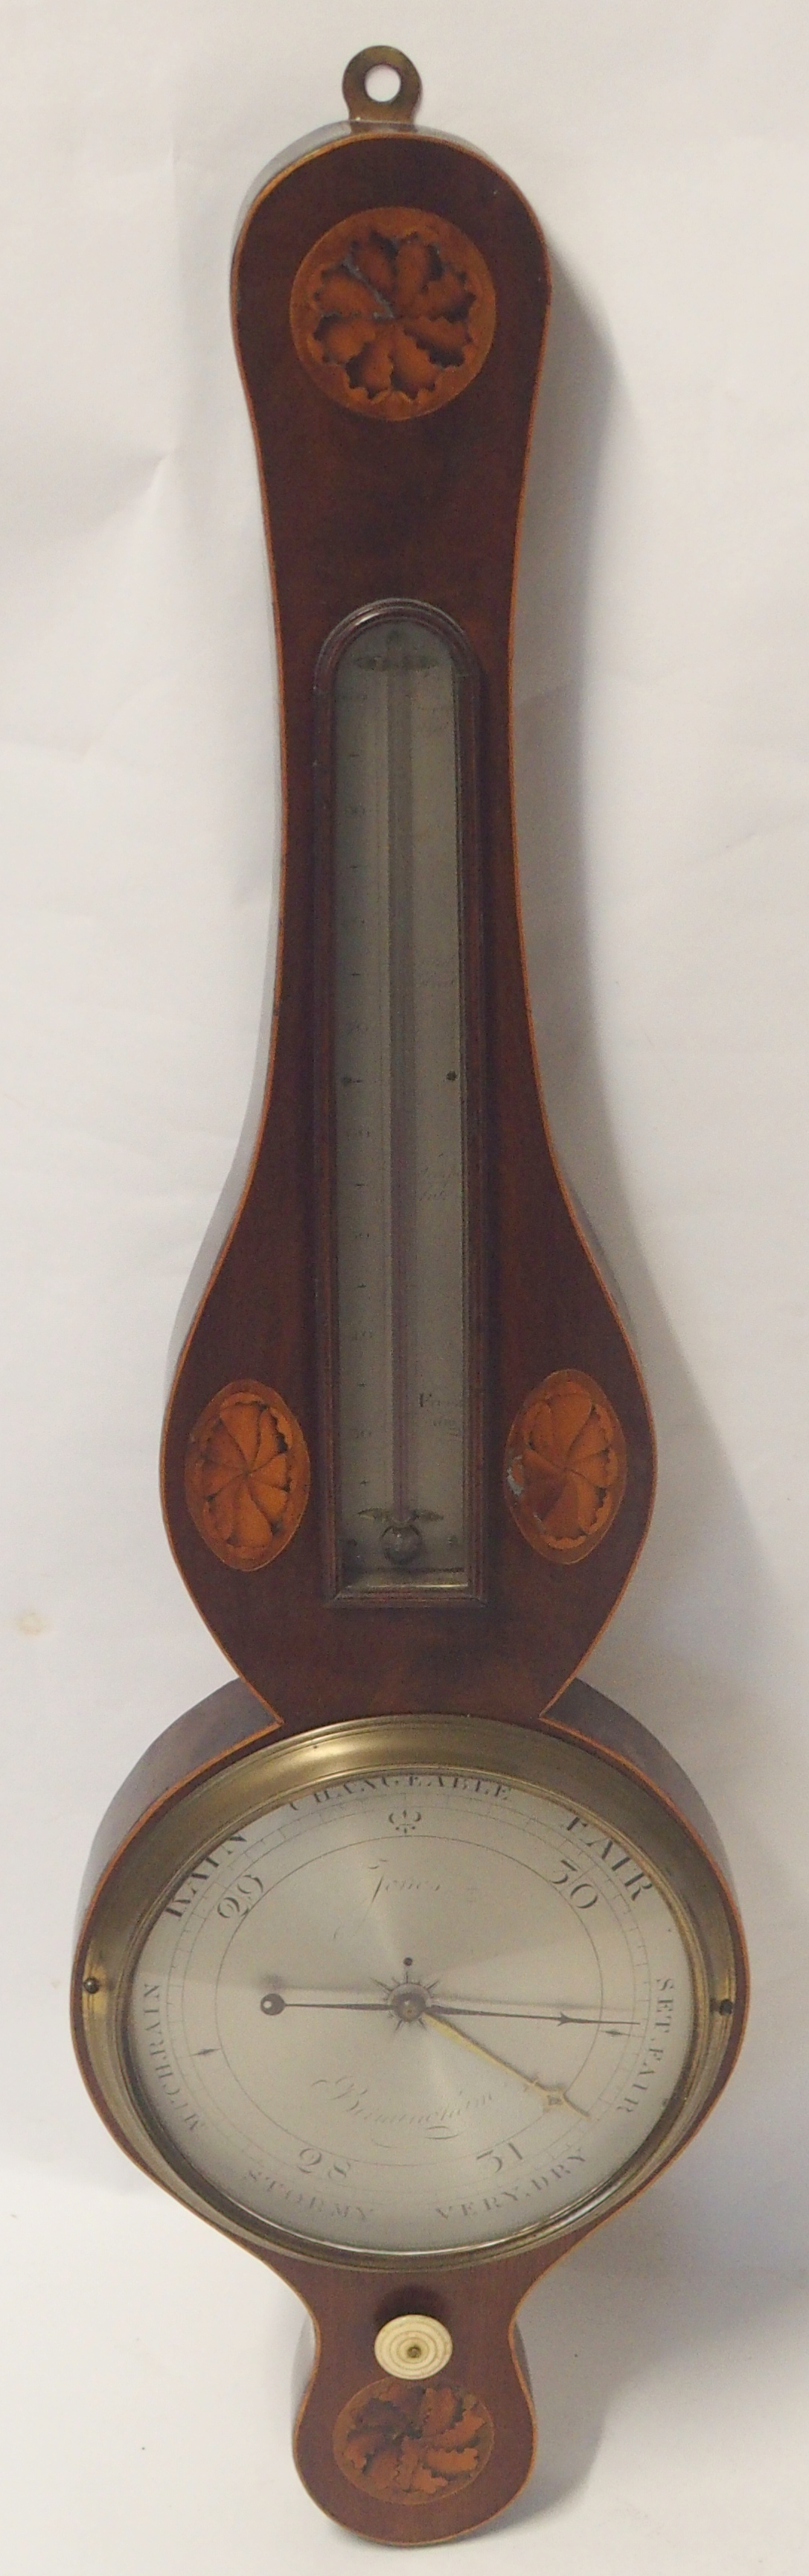 A GEORGE III MAHOGANY WHEEL BAROMETER AND THERMOMETER inscribed to Jones Birmingham, with inlaid